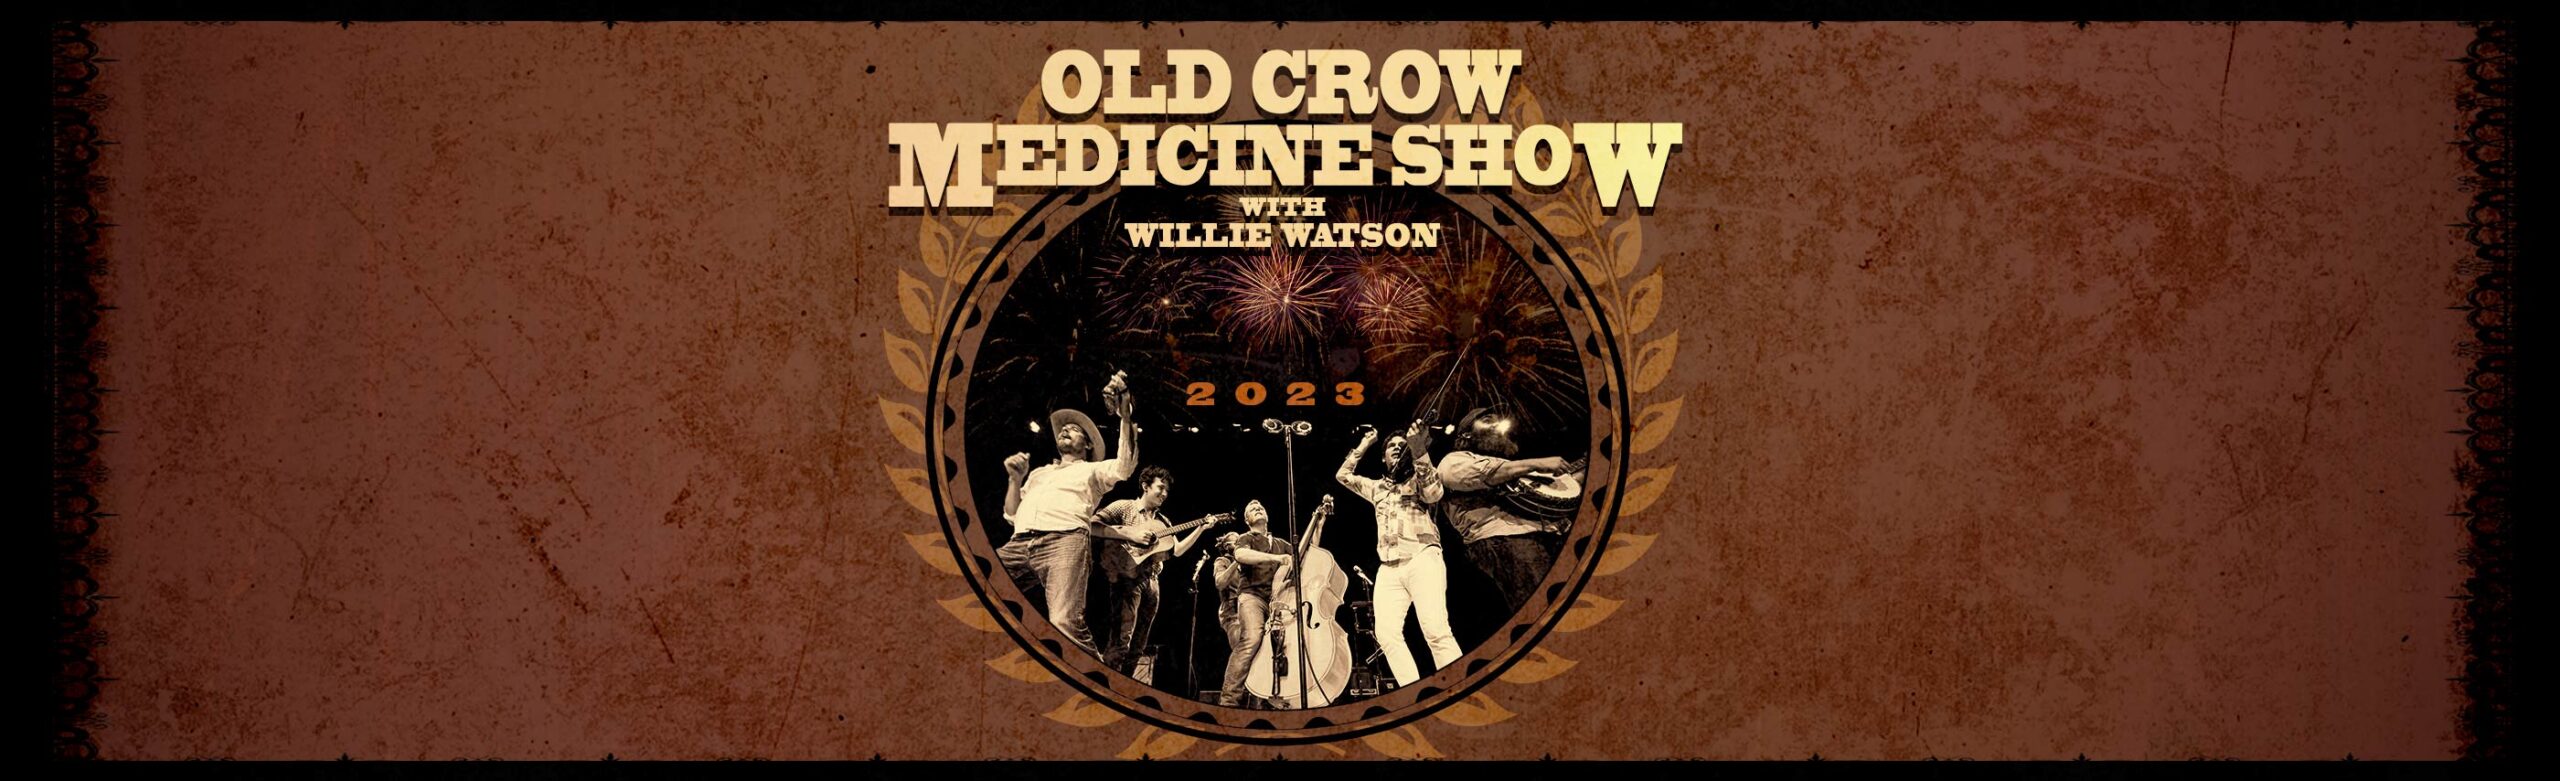 Old Crow Medicine Show Announce Concerts with Willie Watson at KettleHouse Amphitheater and The ELM Image